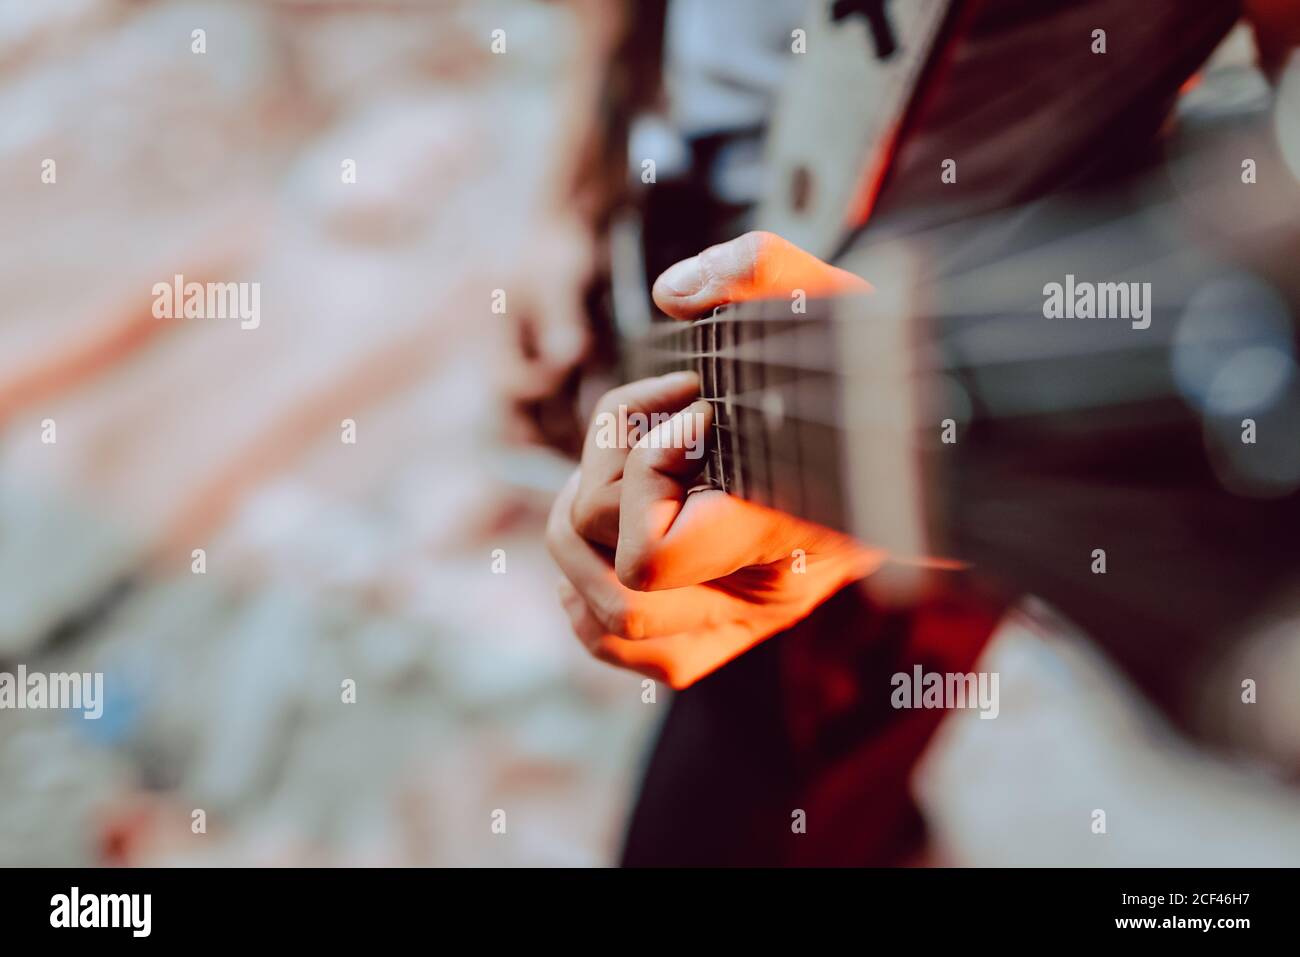 Soft focus of male musician clamping strings on guitar fret board while playing music Stock Photo